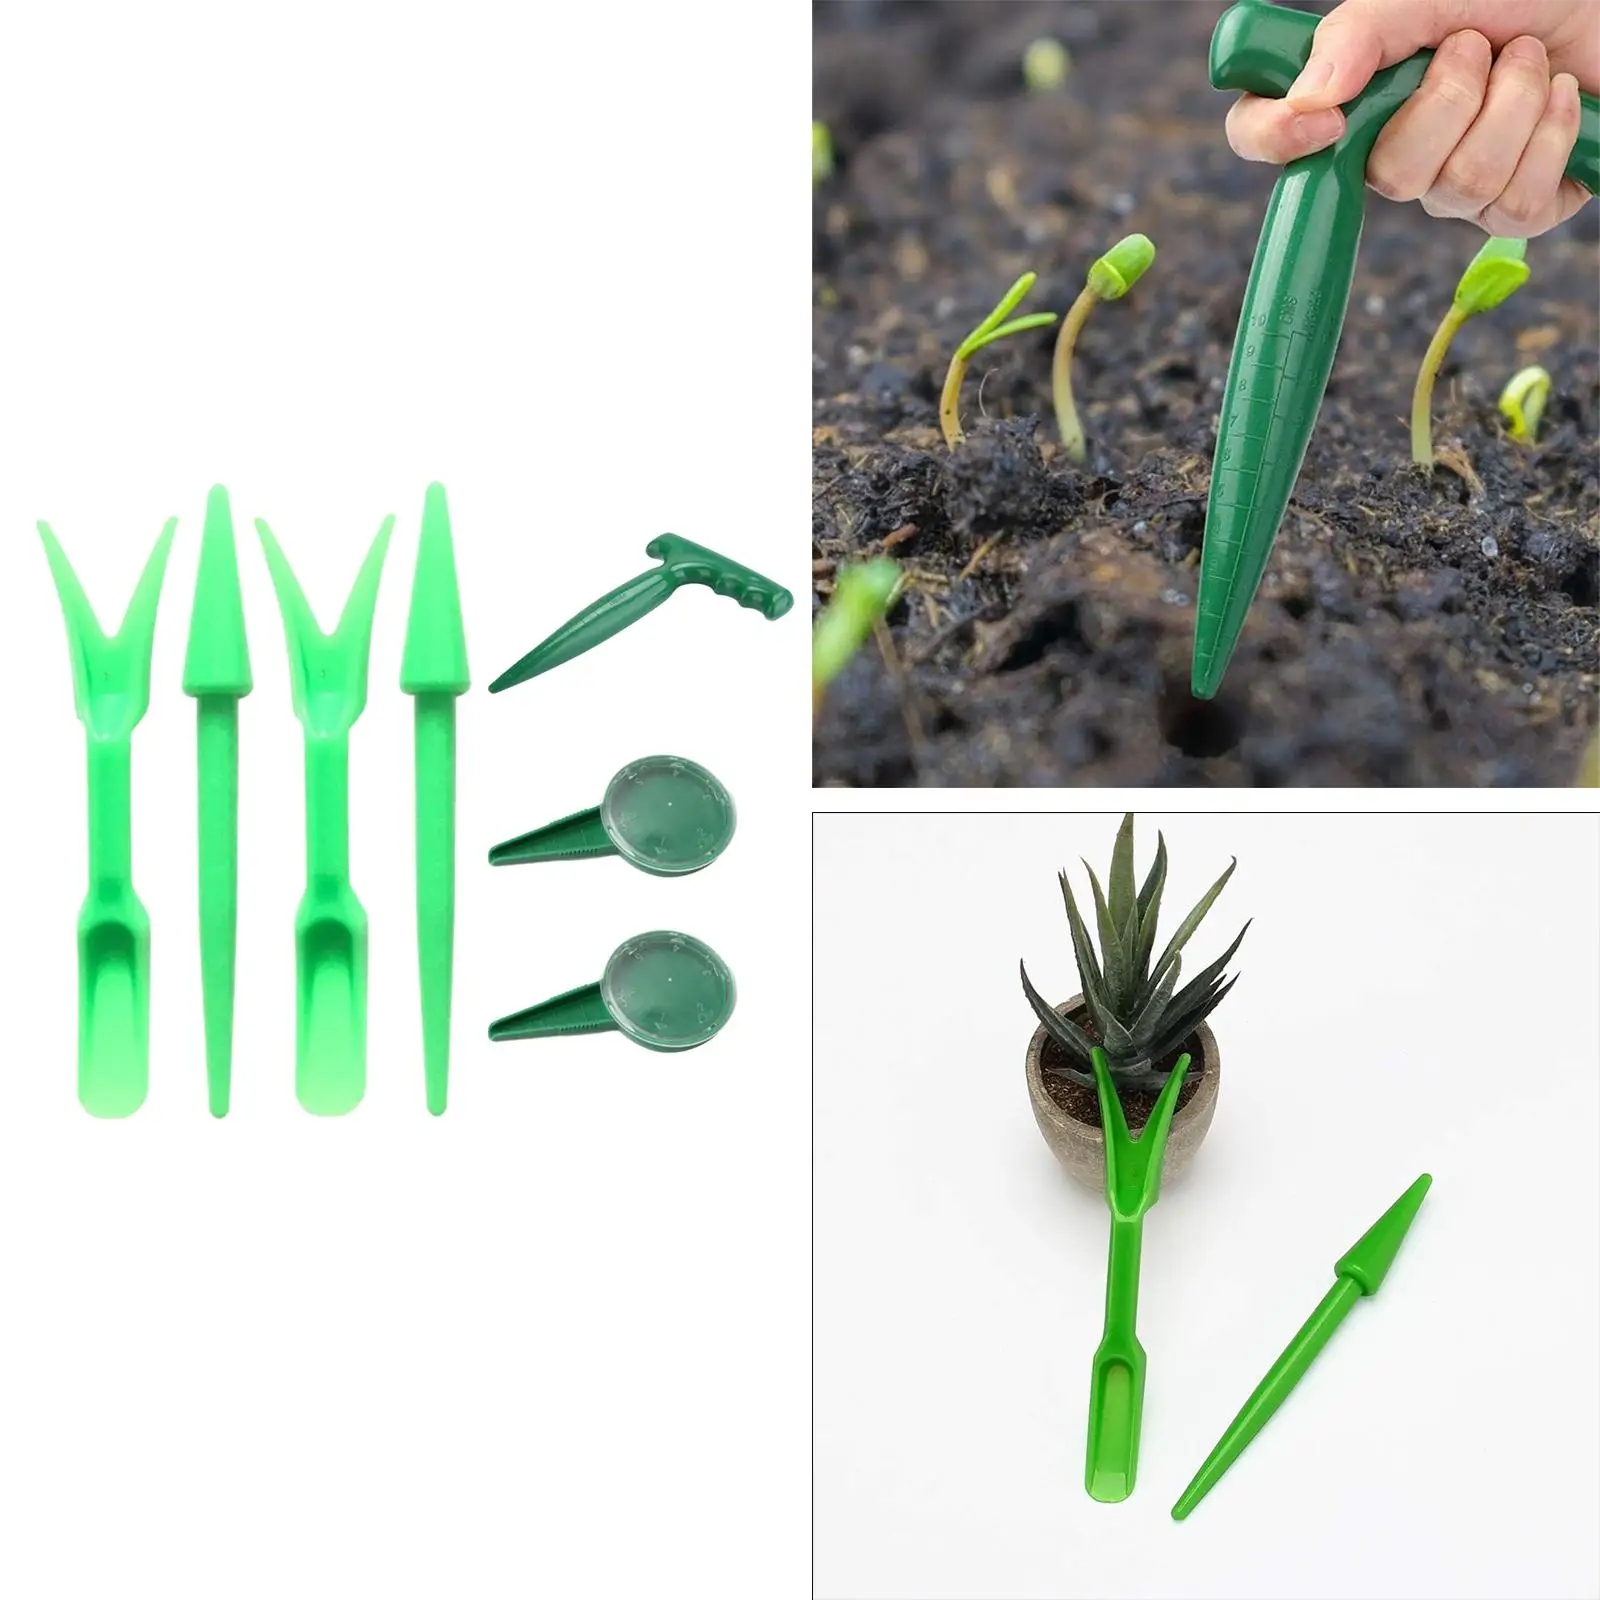 7x Seeding Tool Set Supplies Handheld Seed Planter Tool for Outdoor Planting Vegetables Indoor Garden Plant Pot Tool Sets Farm